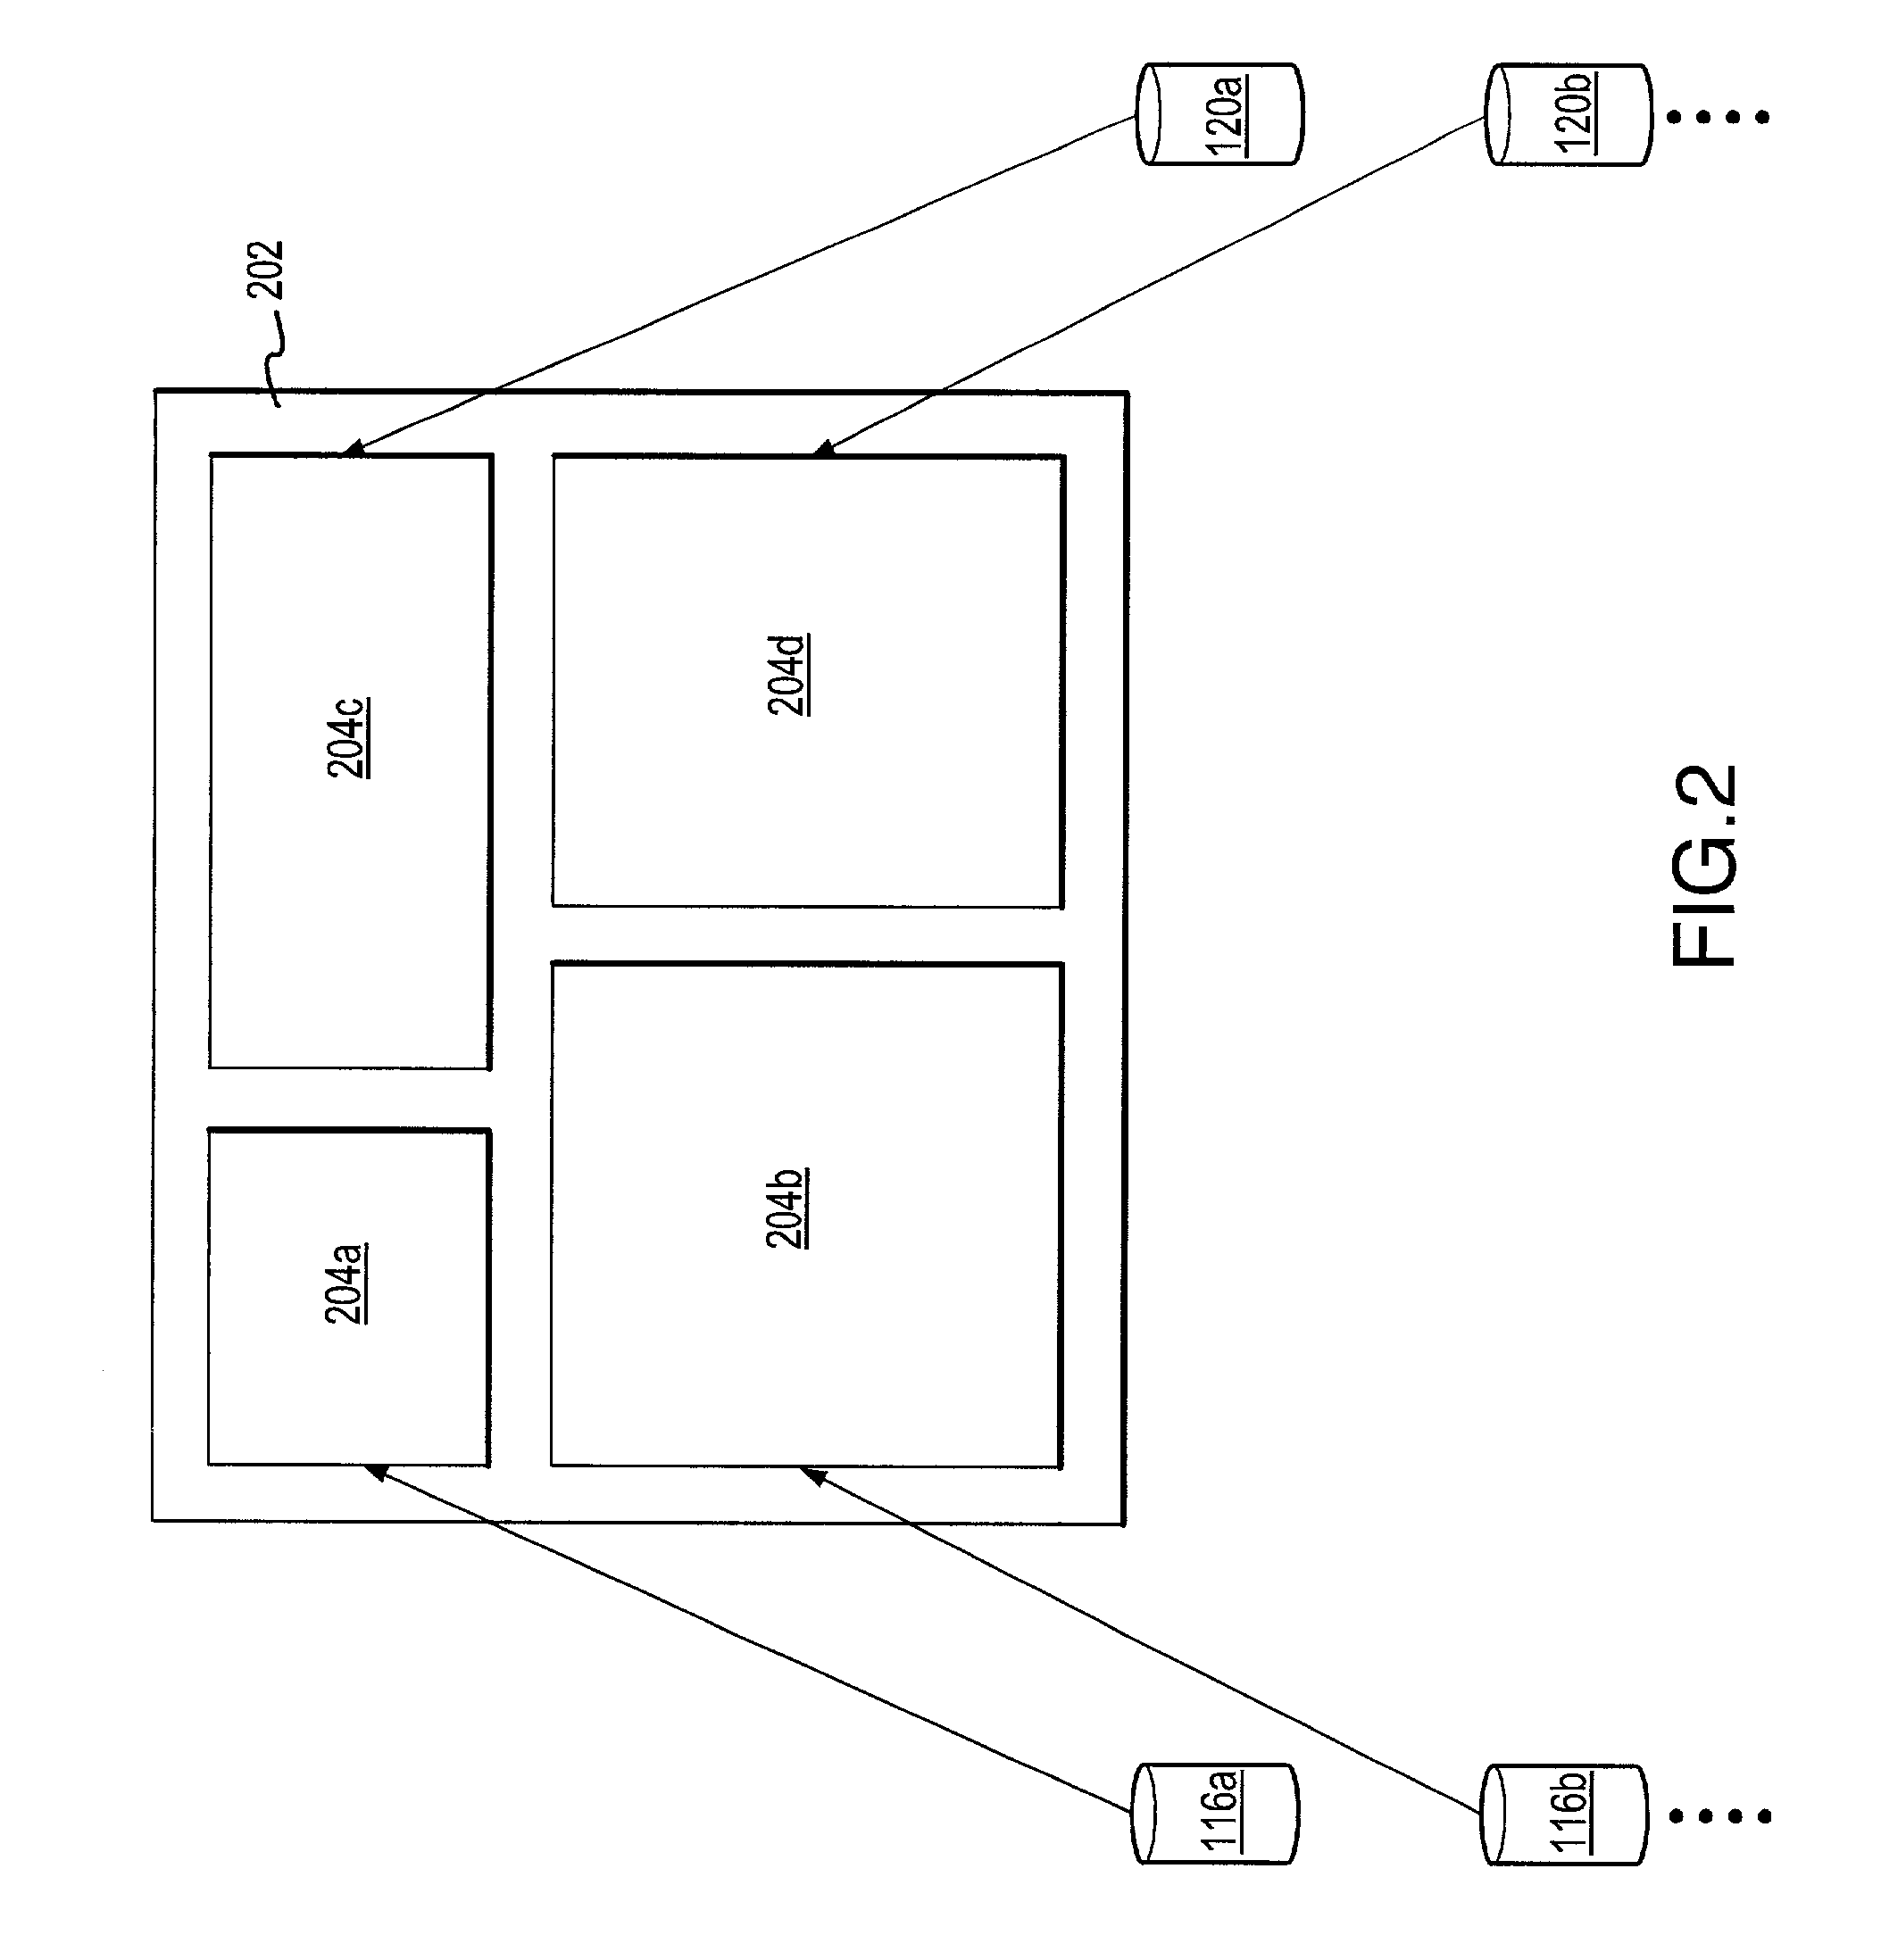 System and method for integrating public and private data